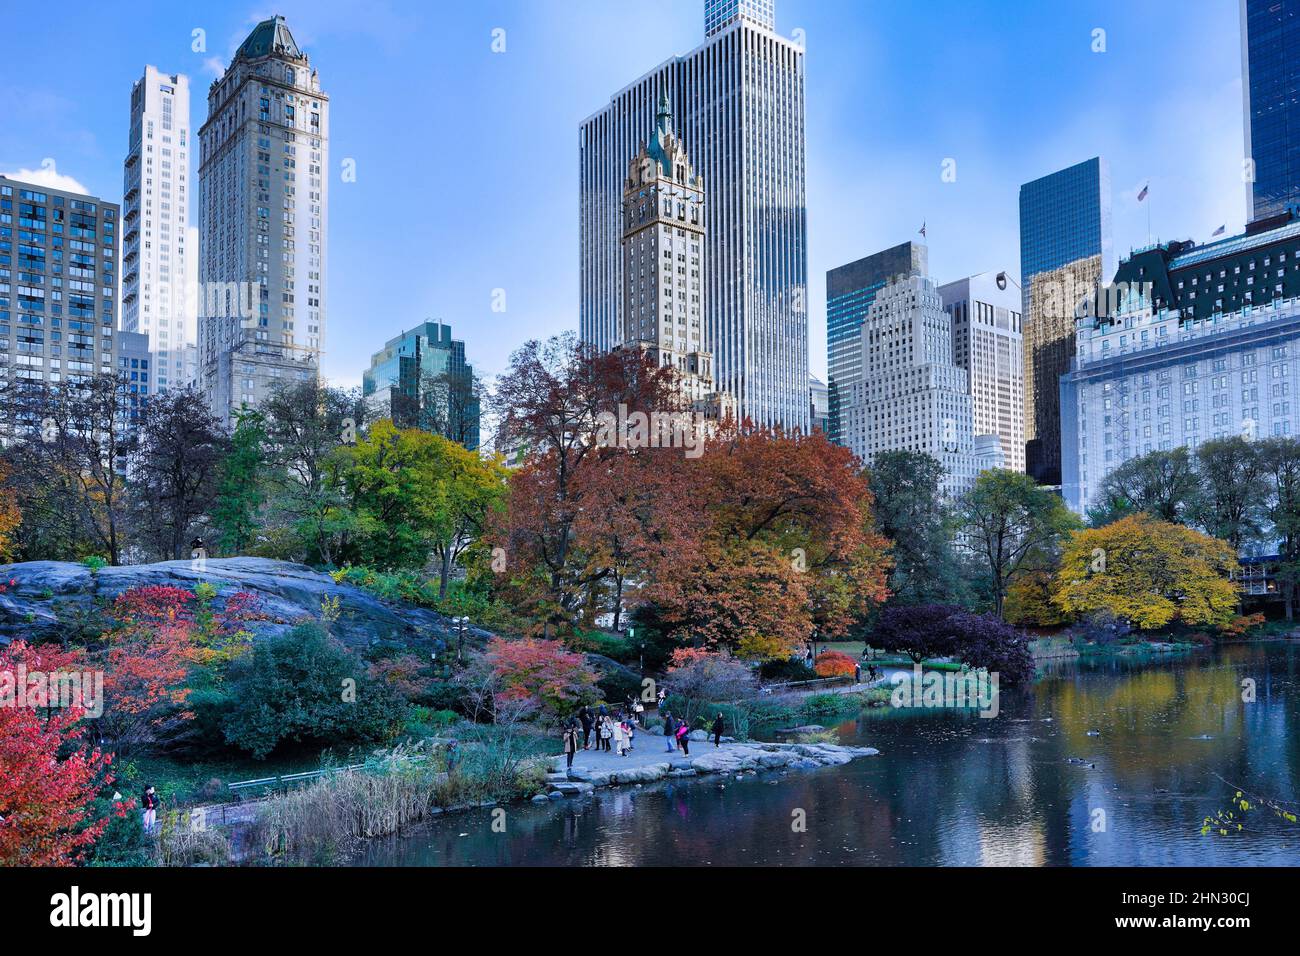 New York Central Park, the Pond at the corner of 5th Avenue and 59th ...